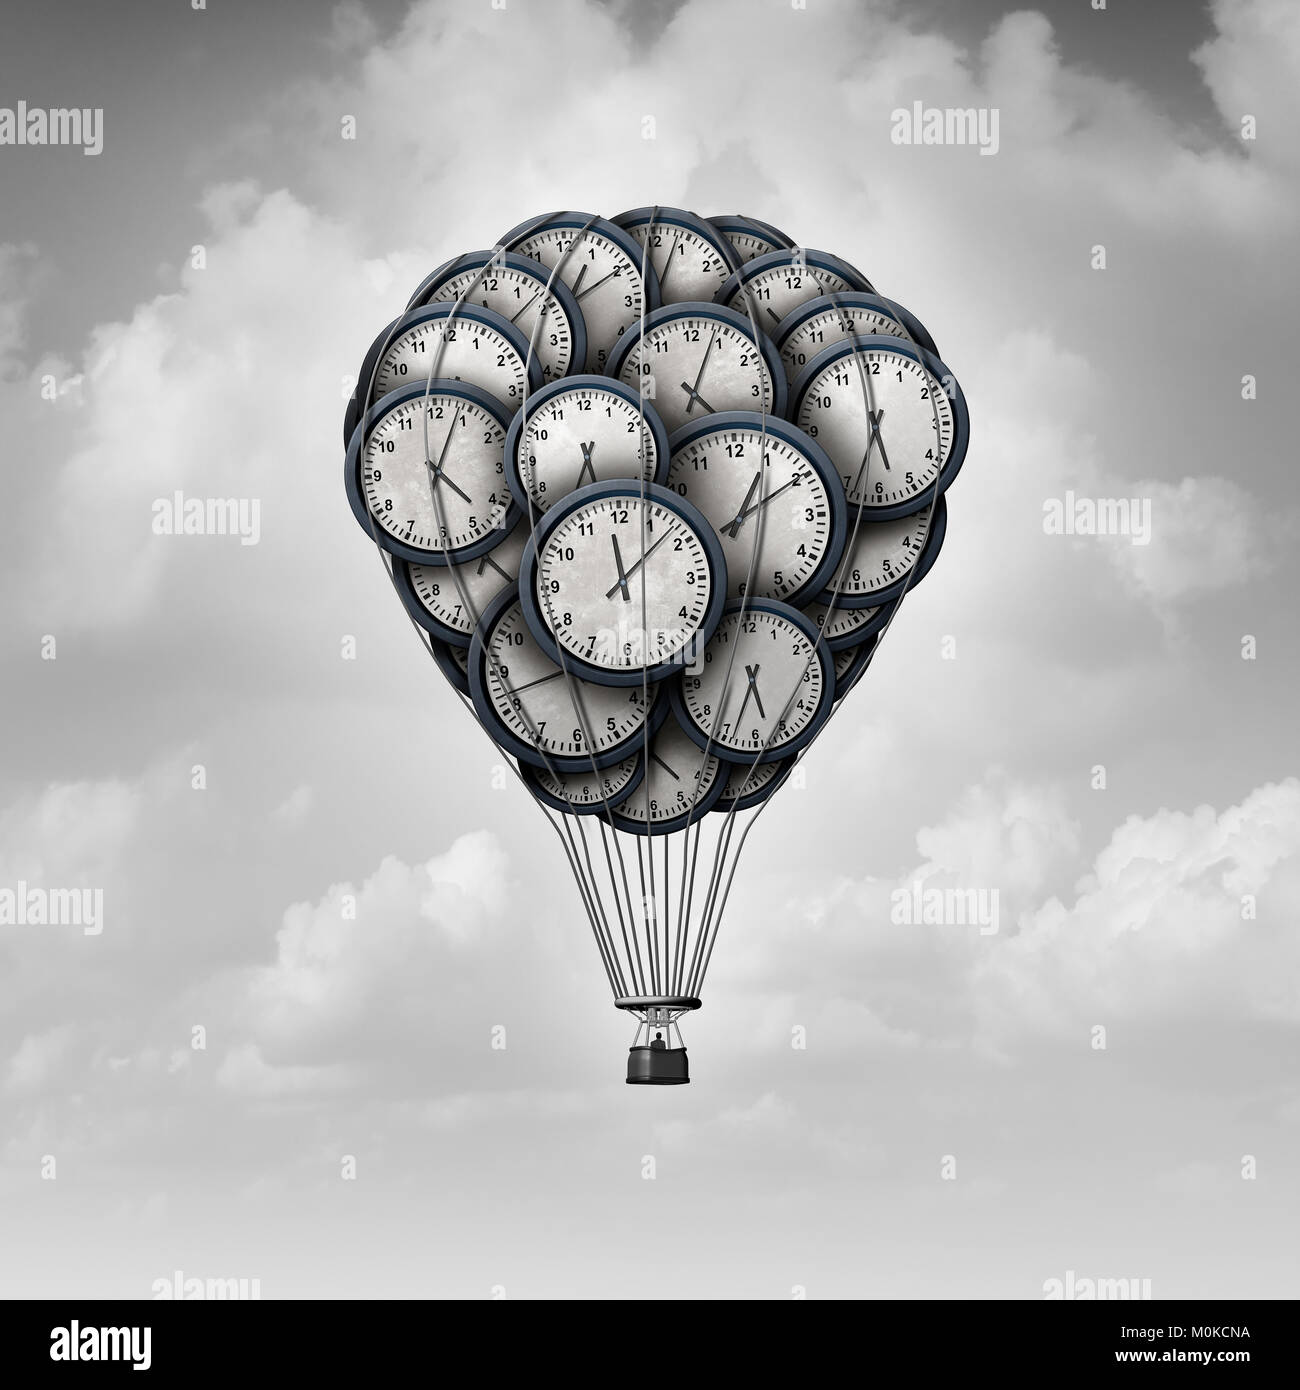 Time journey concept and age exploration idea as a group of clocks shaped as a hot air balloon with 3D illustration elements. Stock Photo